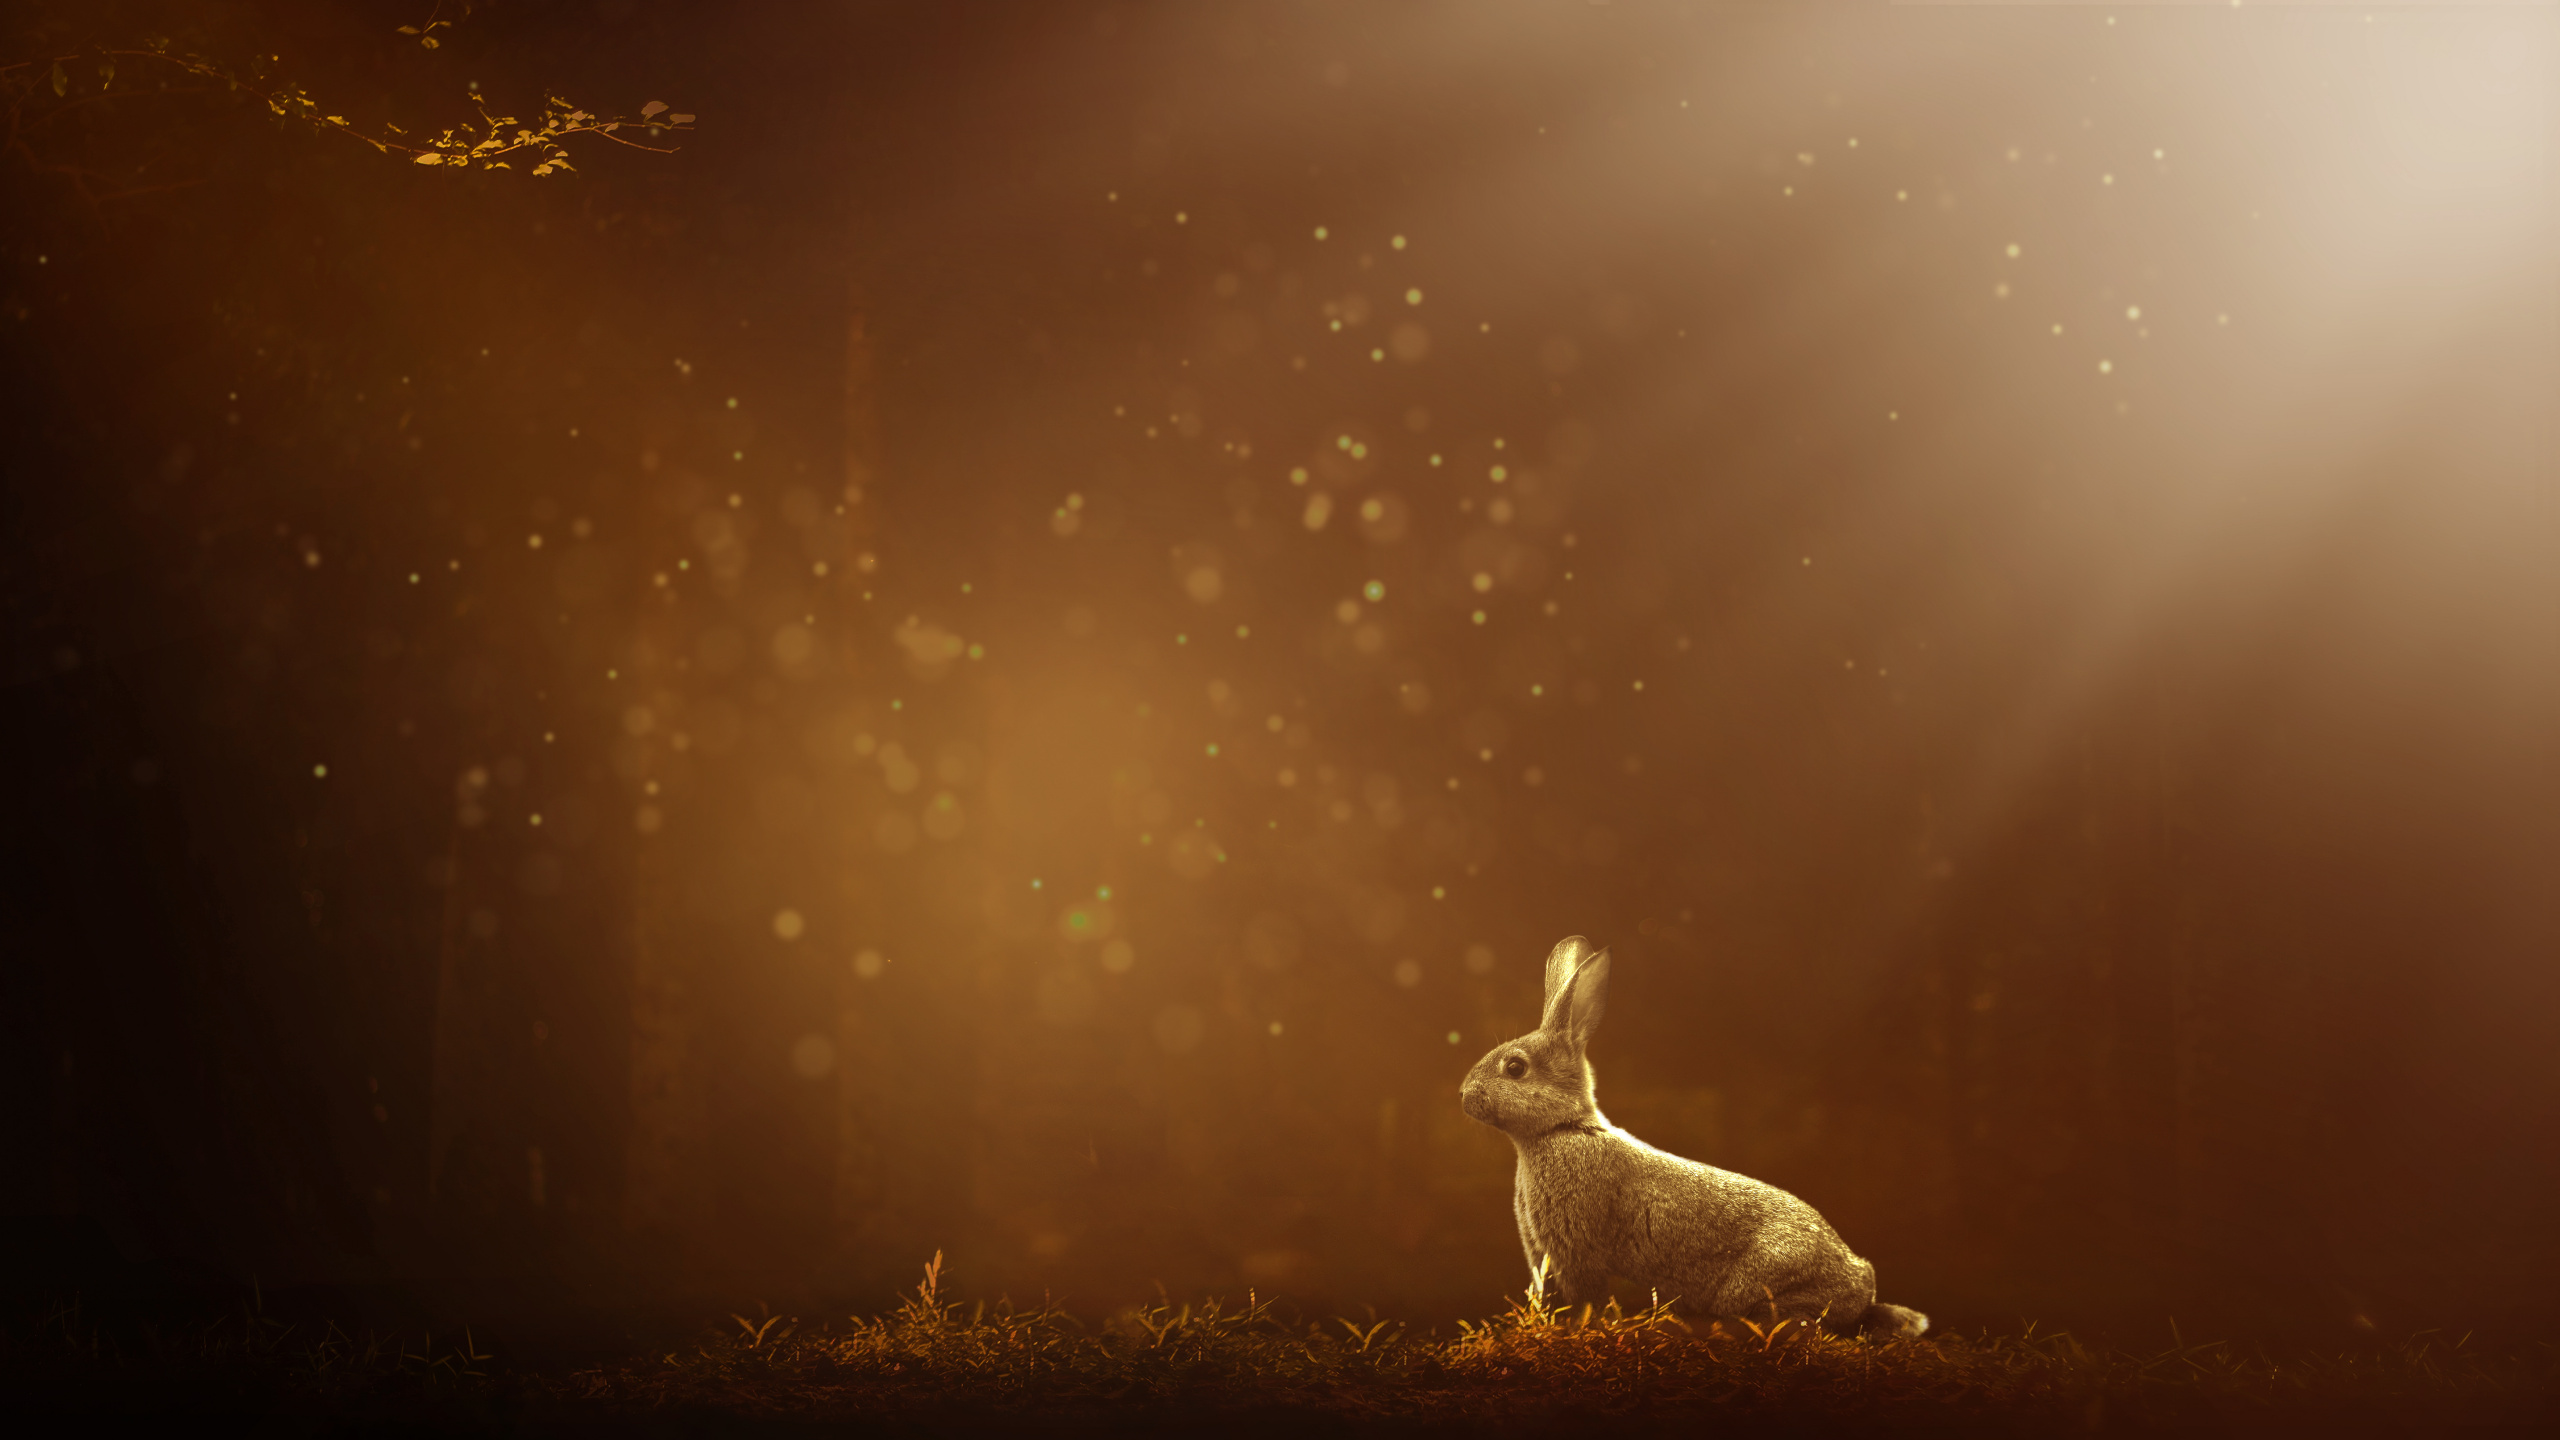 White Rabbit on Brown Grass Field During Night Time. Wallpaper in 2560x1440 Resolution